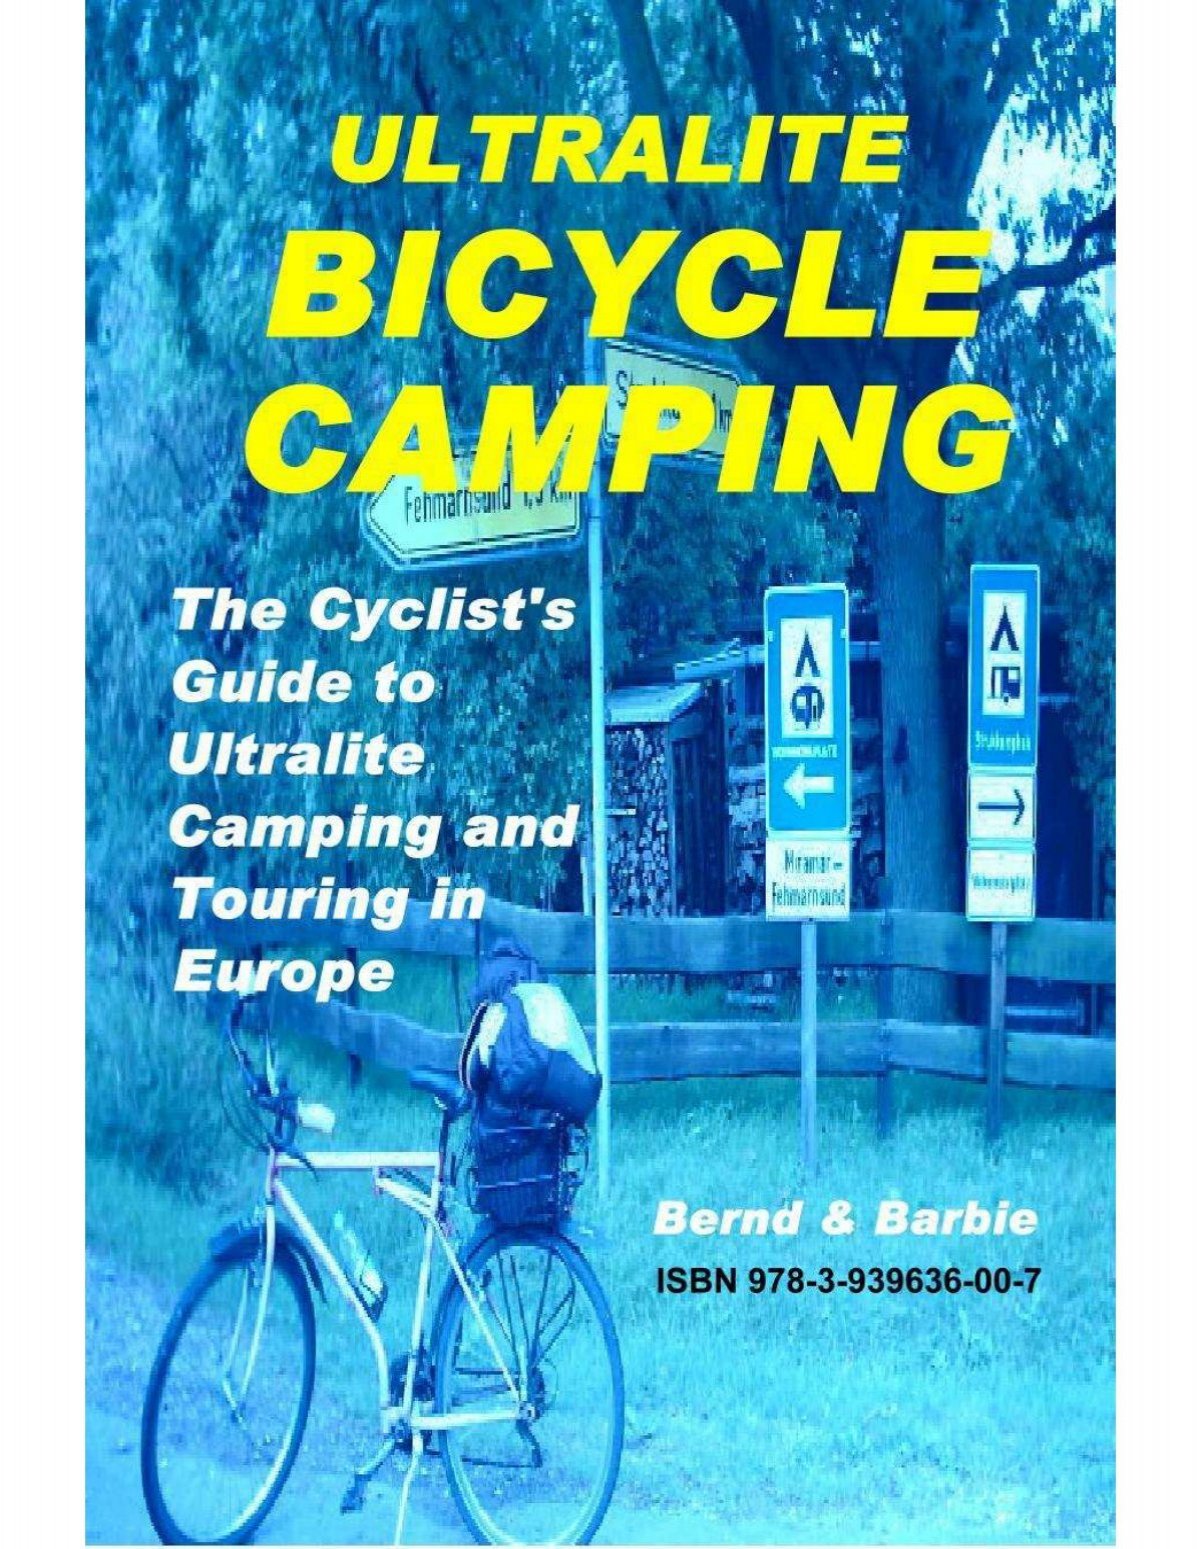 Ultralite Bicycle Camping - e-book Touring - Pro Bicycle